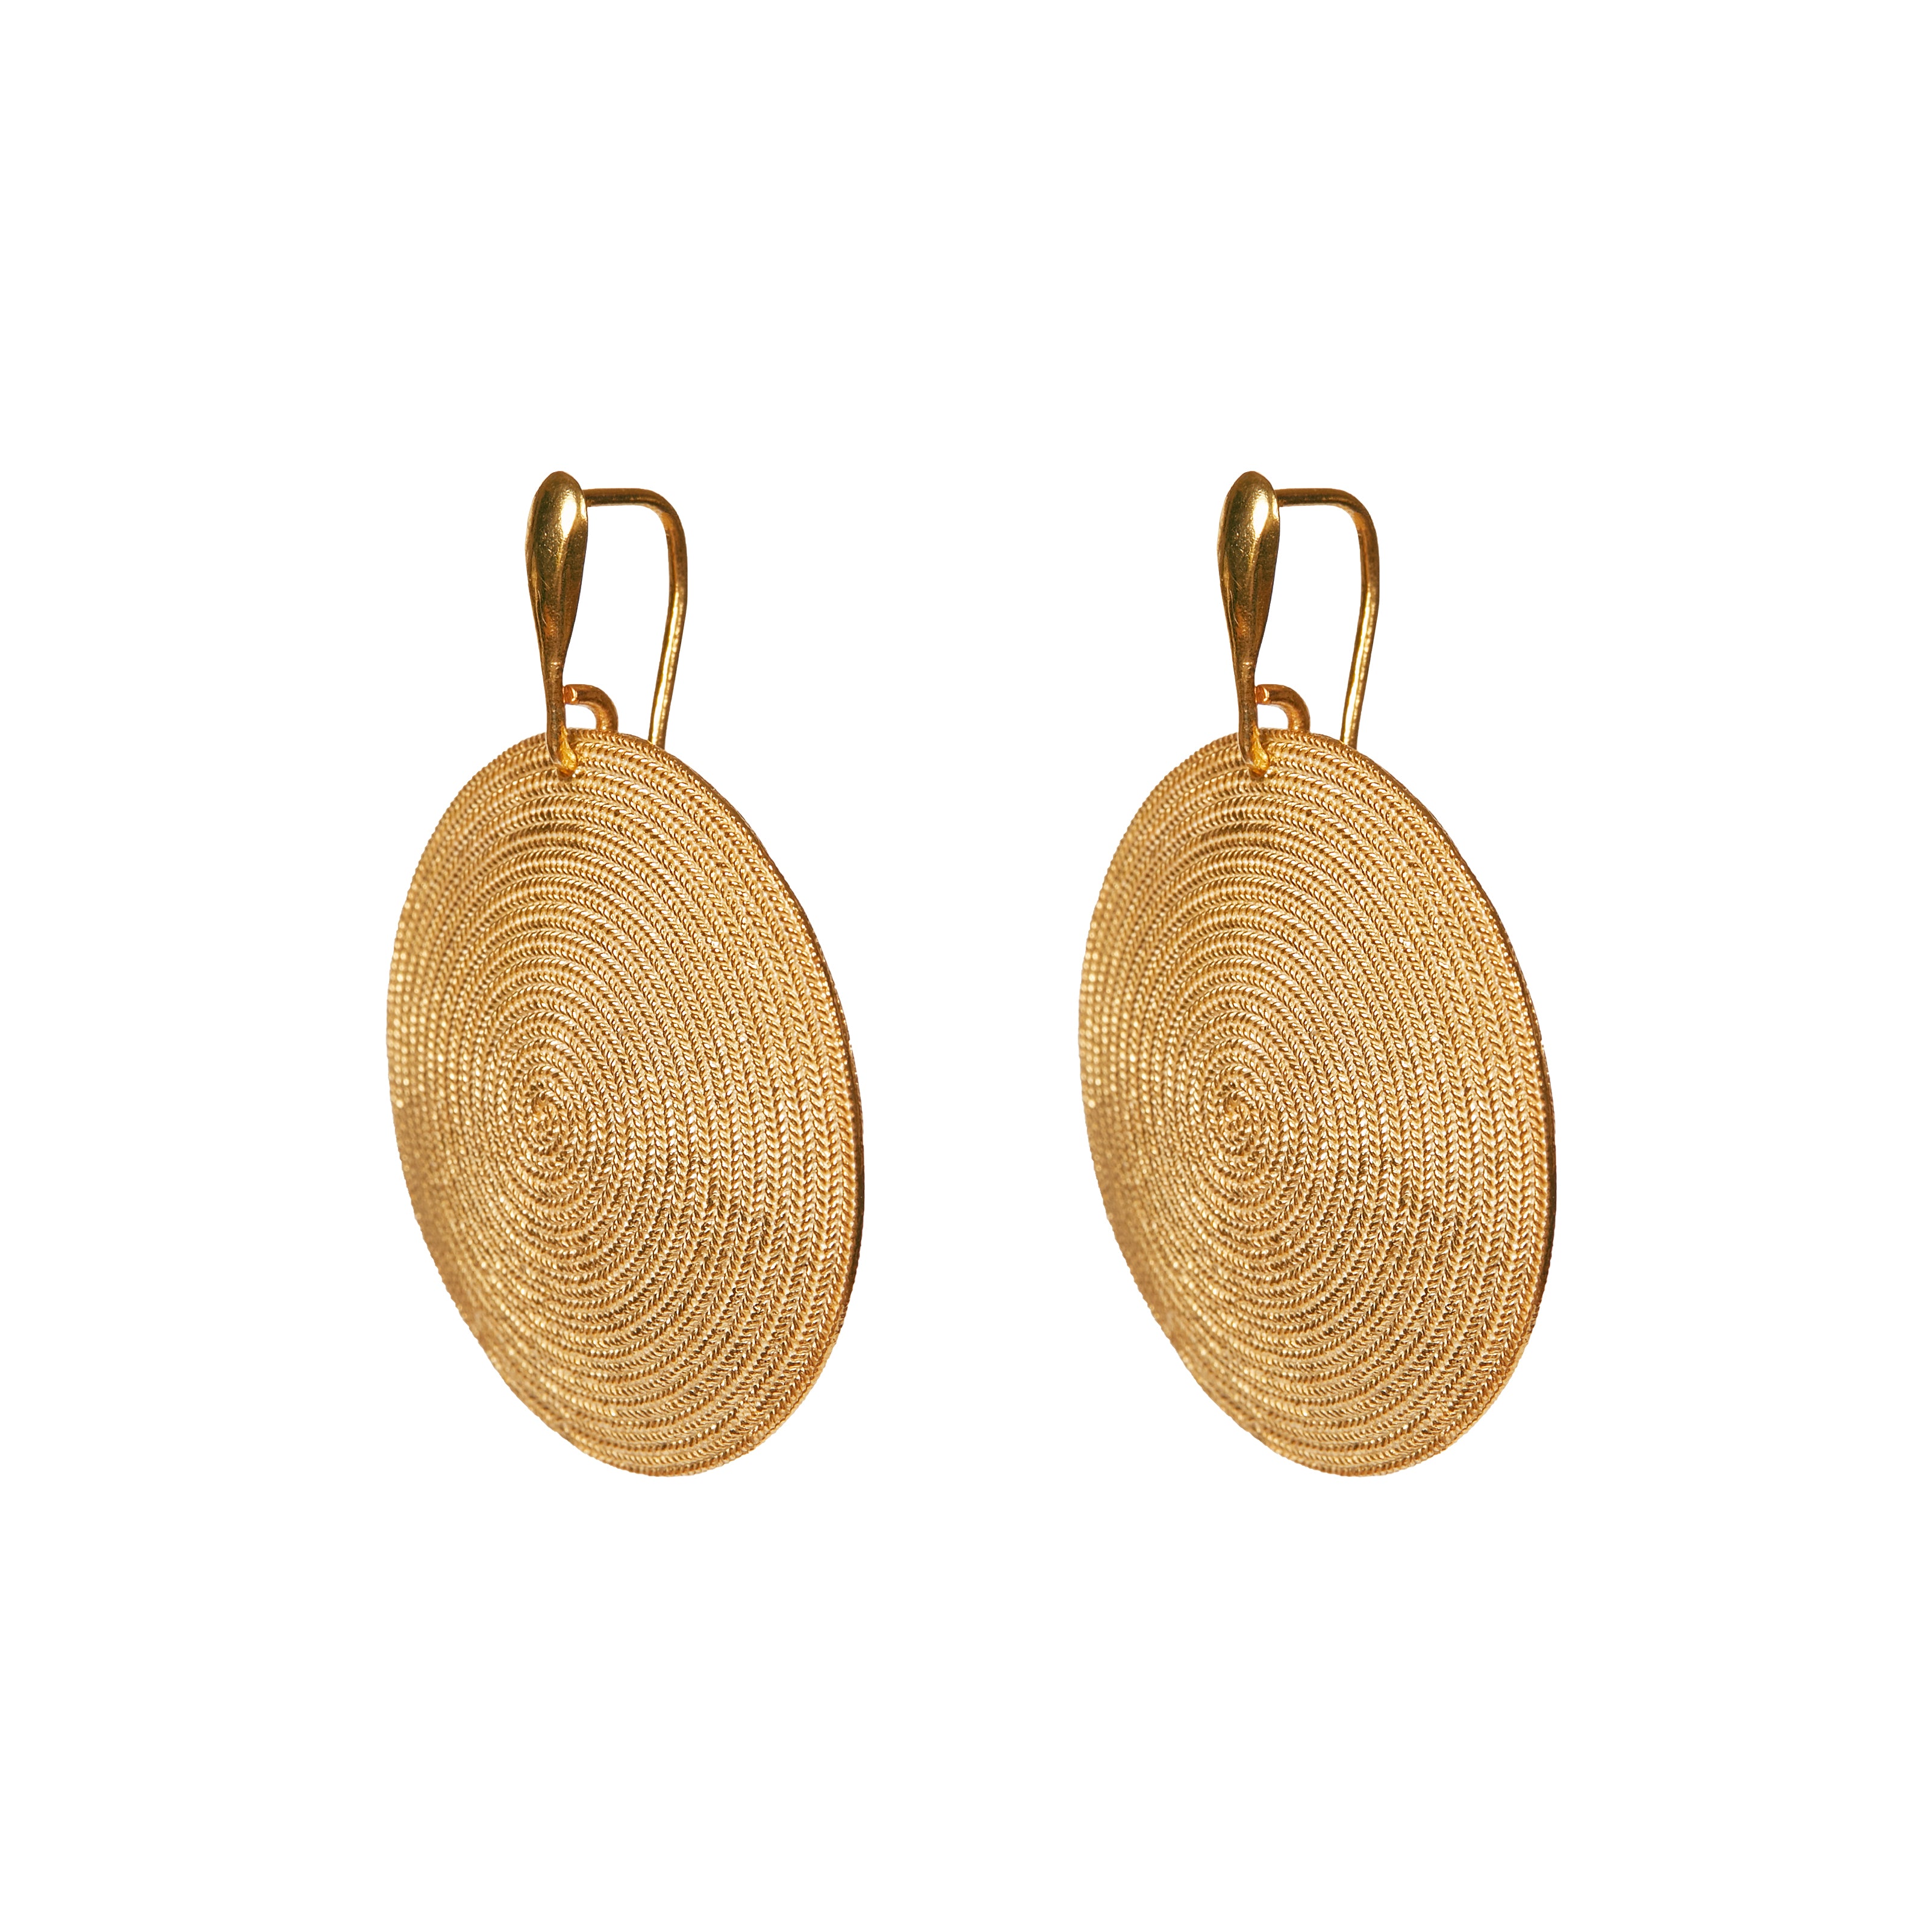 Earrings MAMISOL - Filigree - Gold-plated silver | MEA AYAYA 